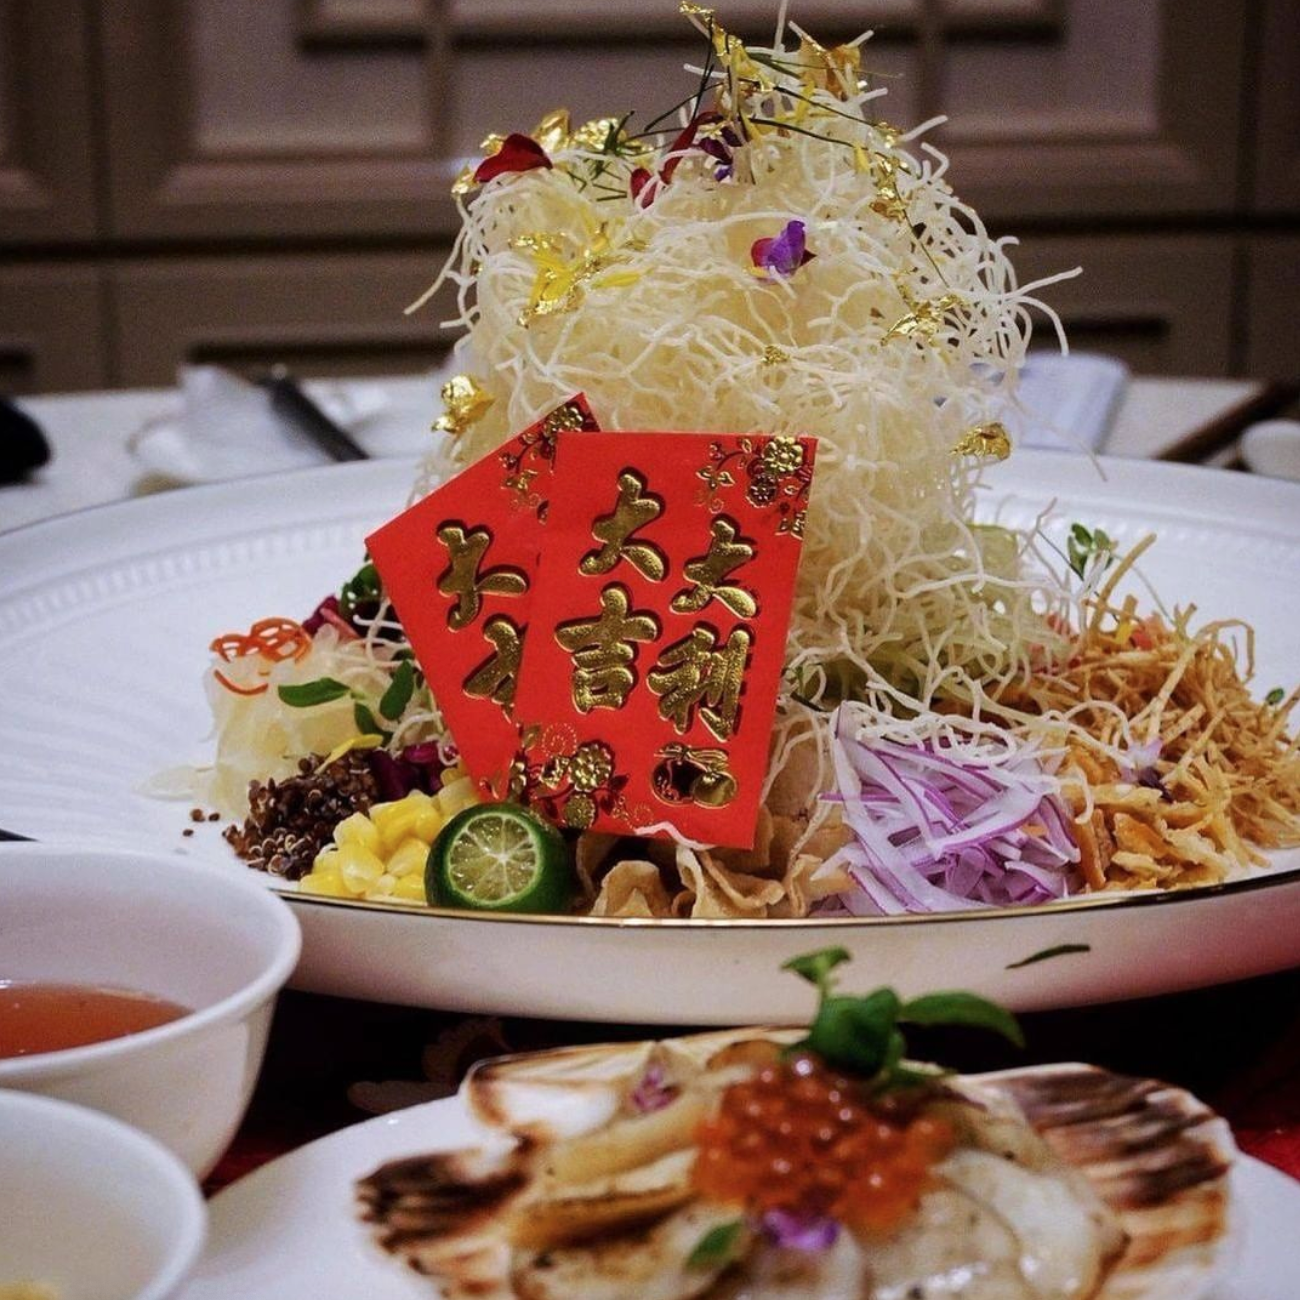 Lo Hei garnished with gold shavings